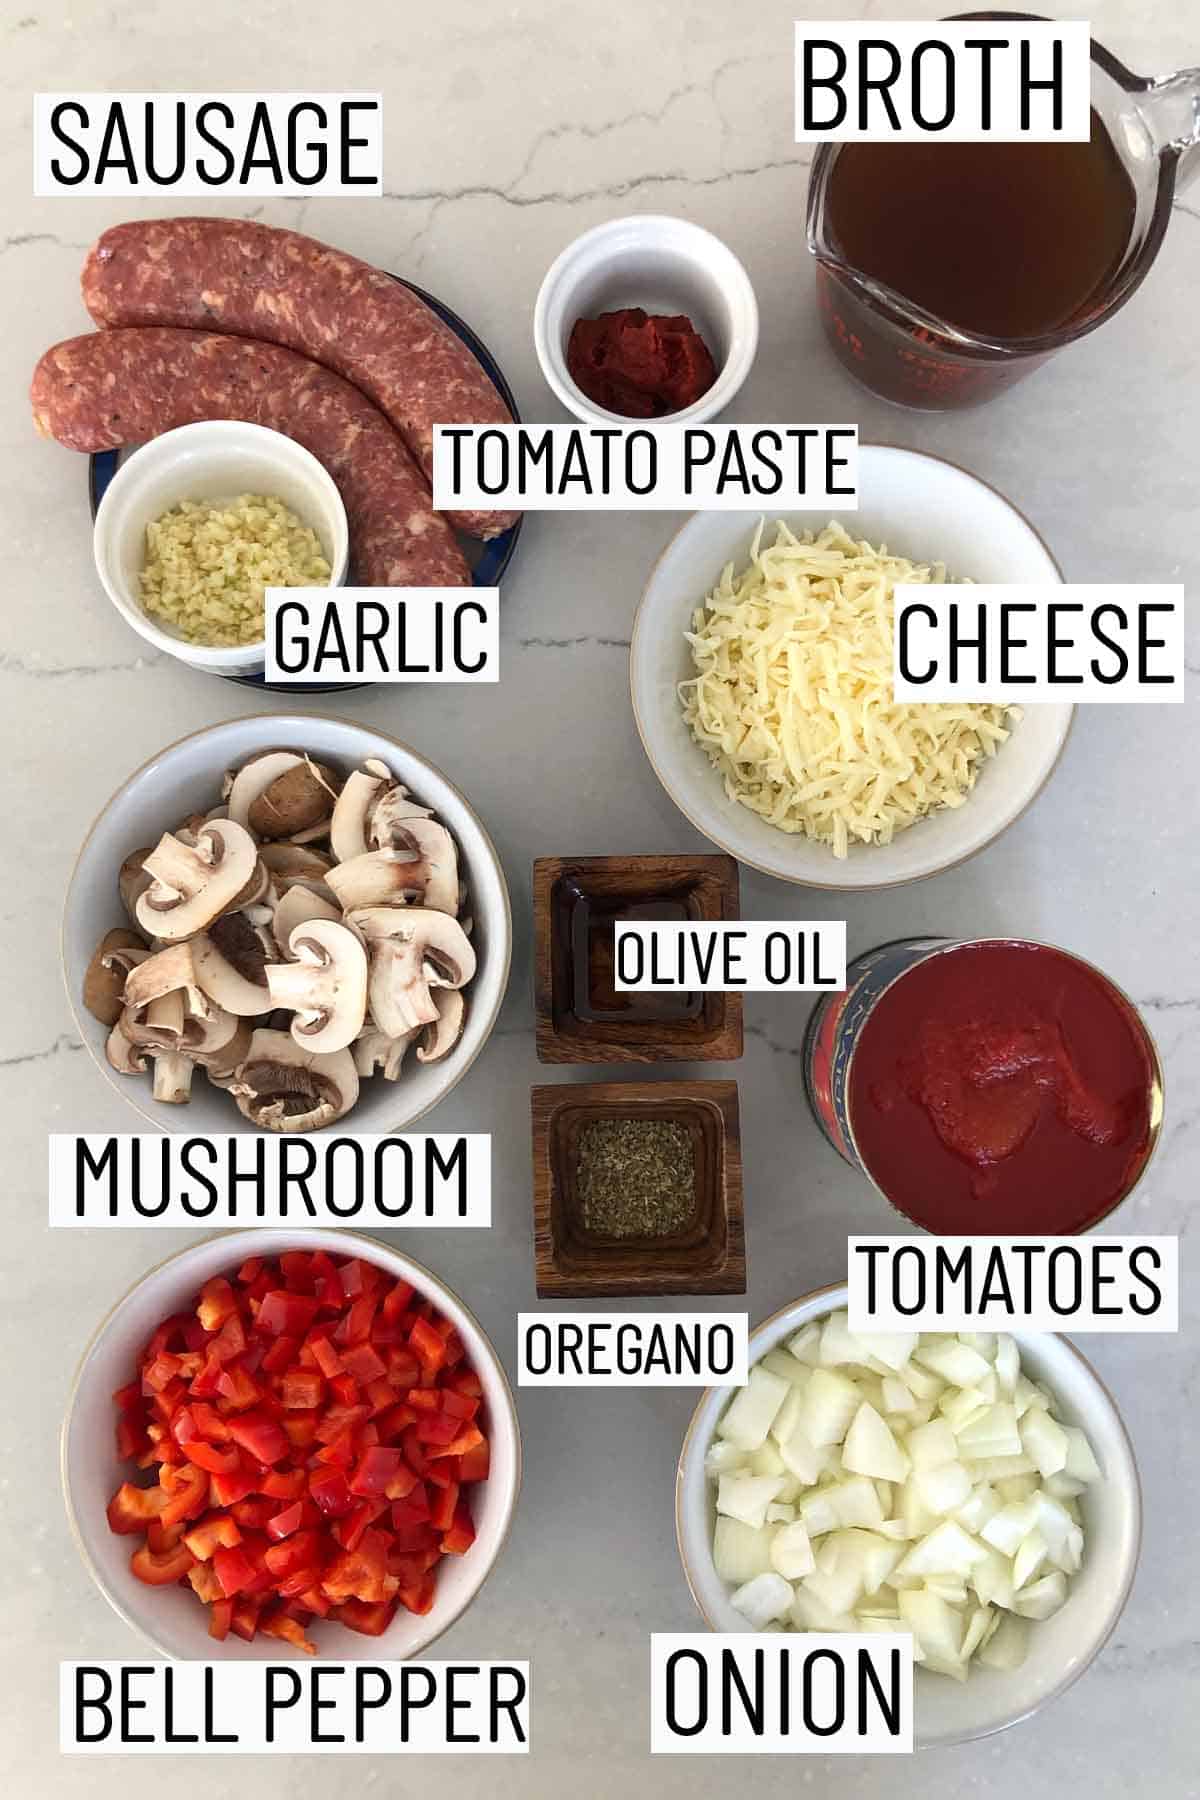 Flat lay image of portioned recipe ingredients including broth, tomato paste, sausage, garlic, cheese, olive oil, oregano, mushroom, bell pepper, onion, and tomatoes. 